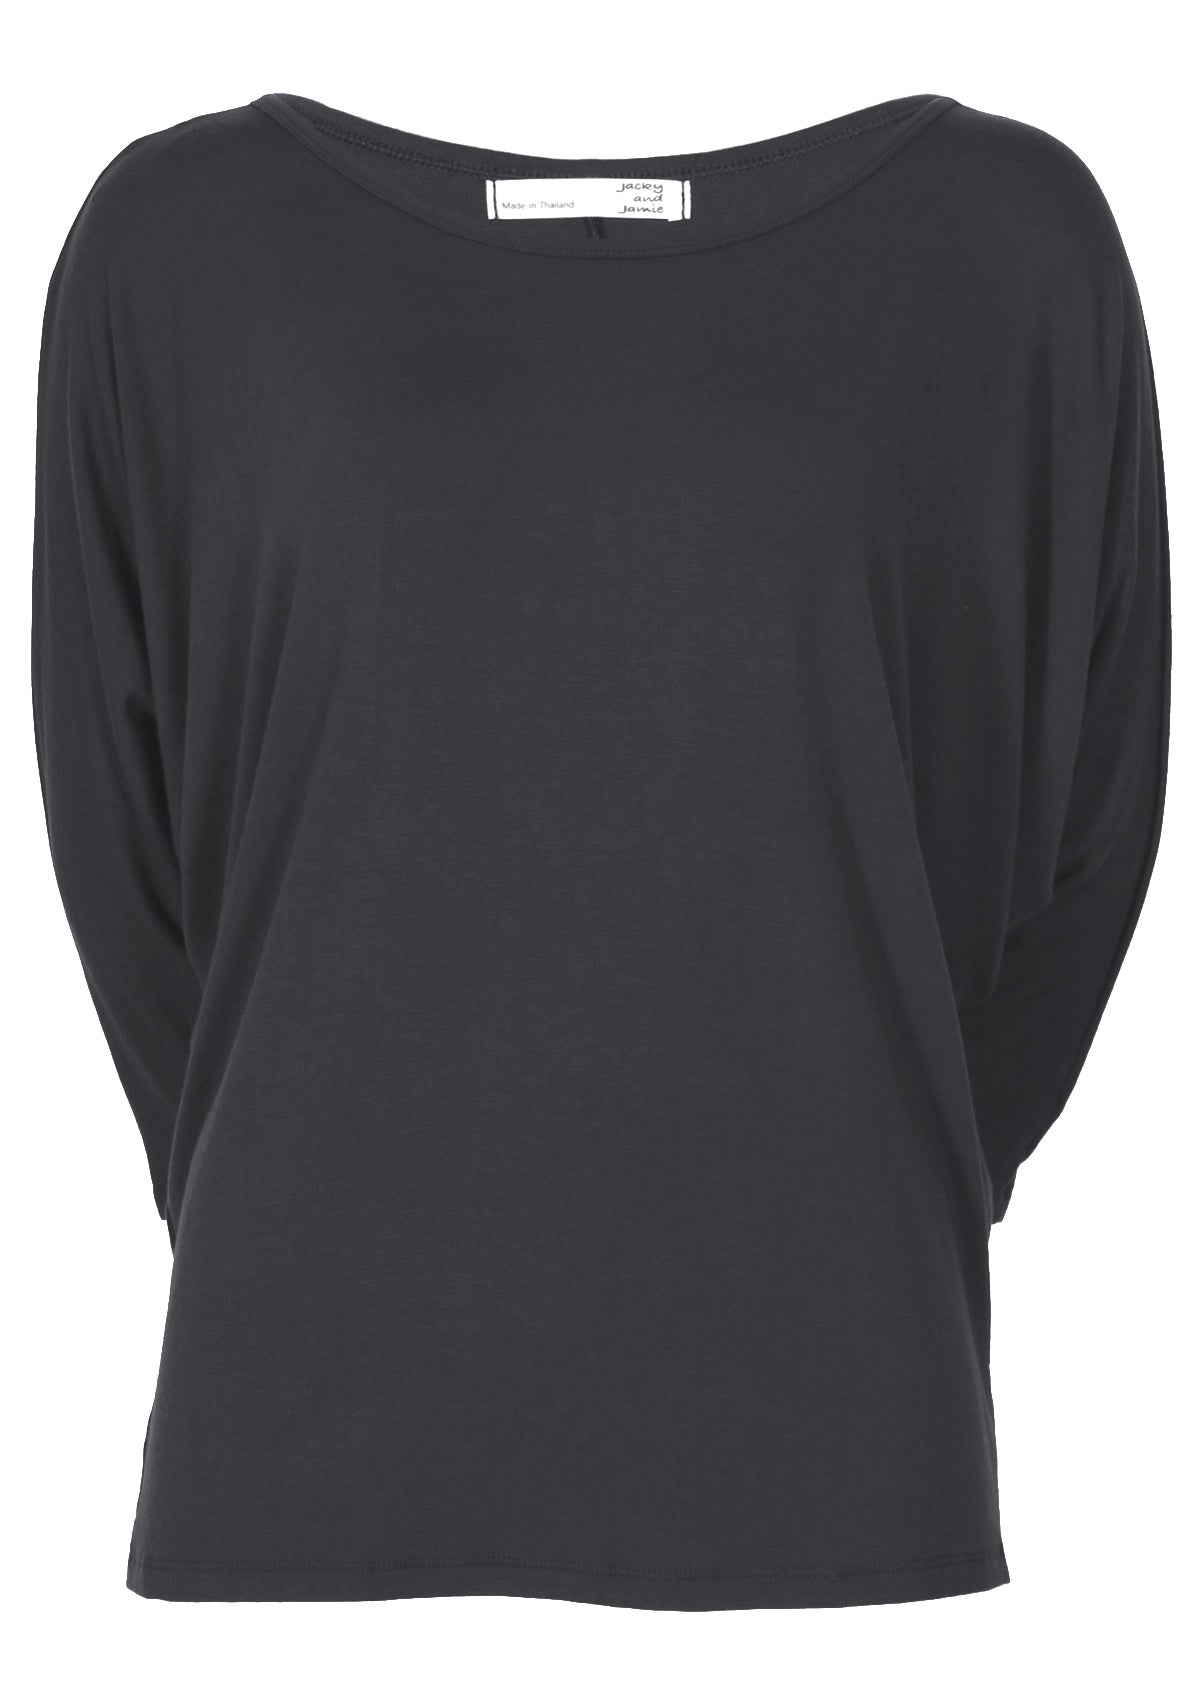 Front view of a women's 3/4 sleeve rayon batwing round neckline dark grey top.